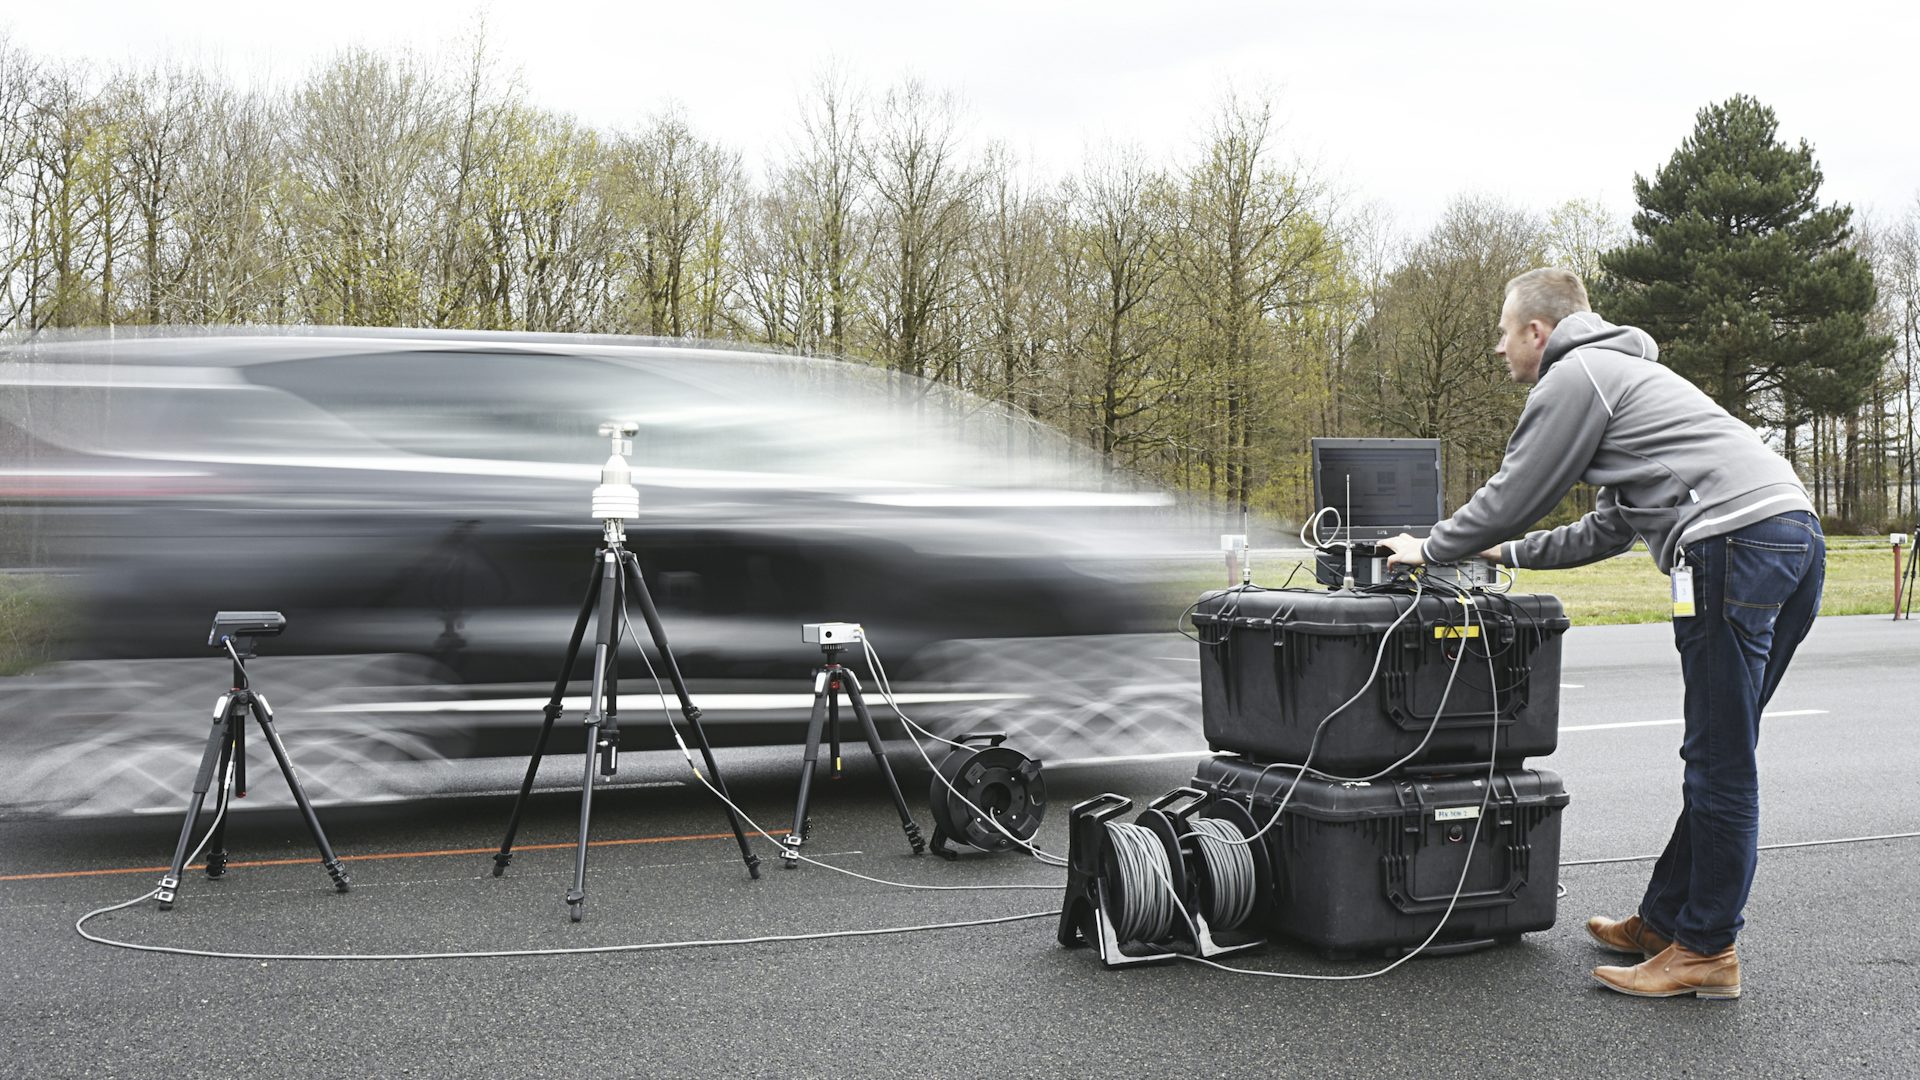 An engineer performing pass-by noise testing on a car passing through.